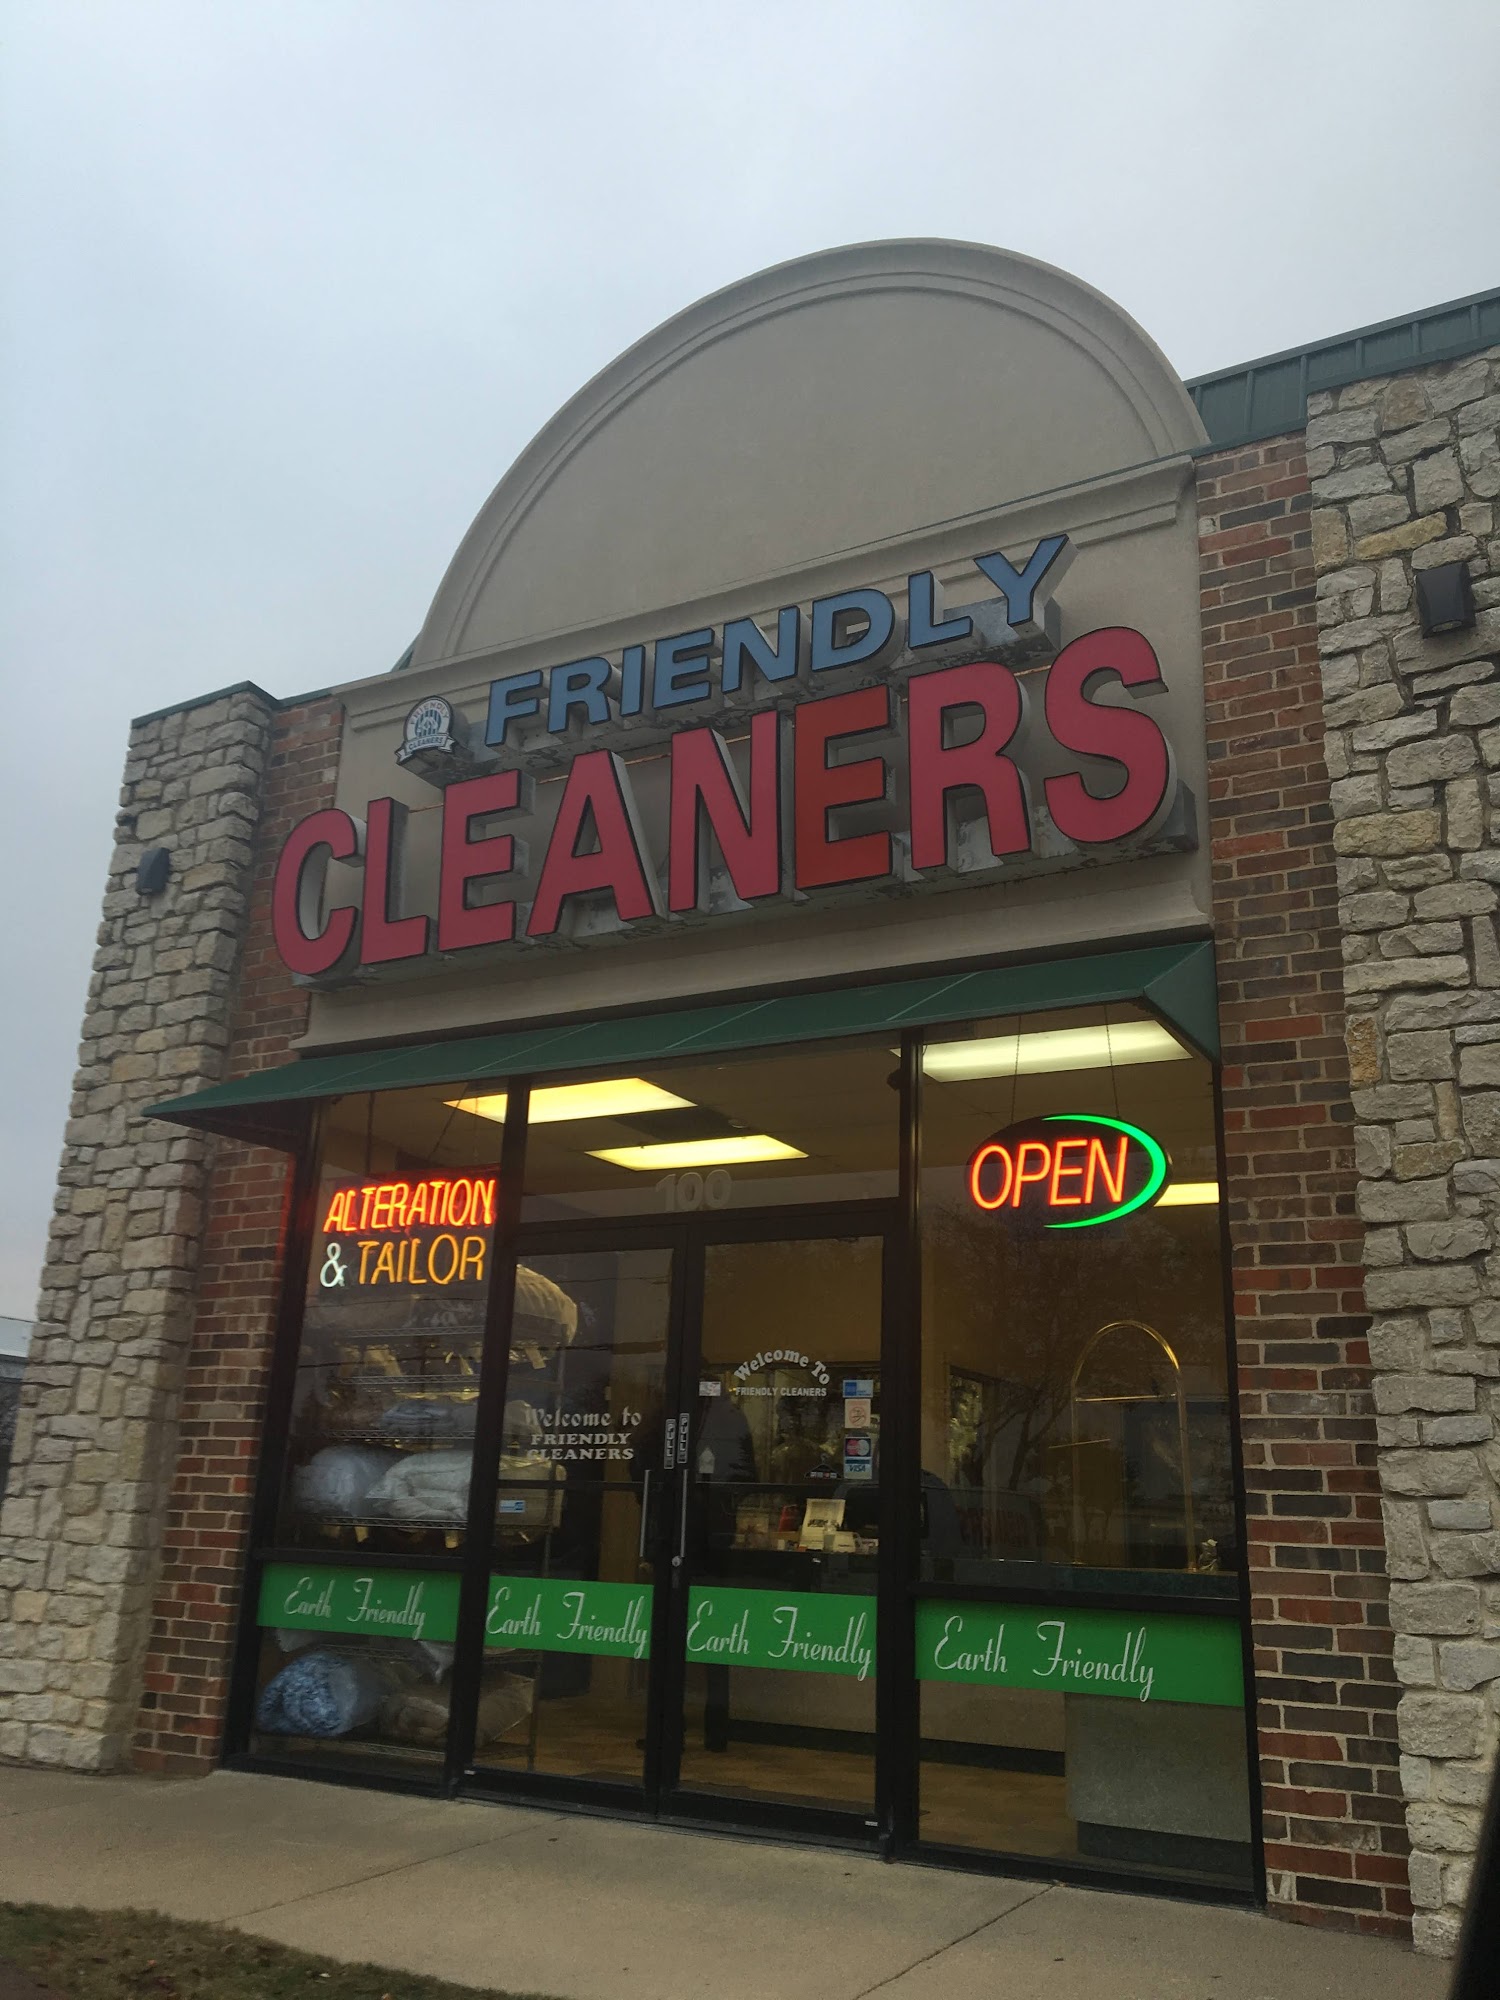 Friendly Cleaners